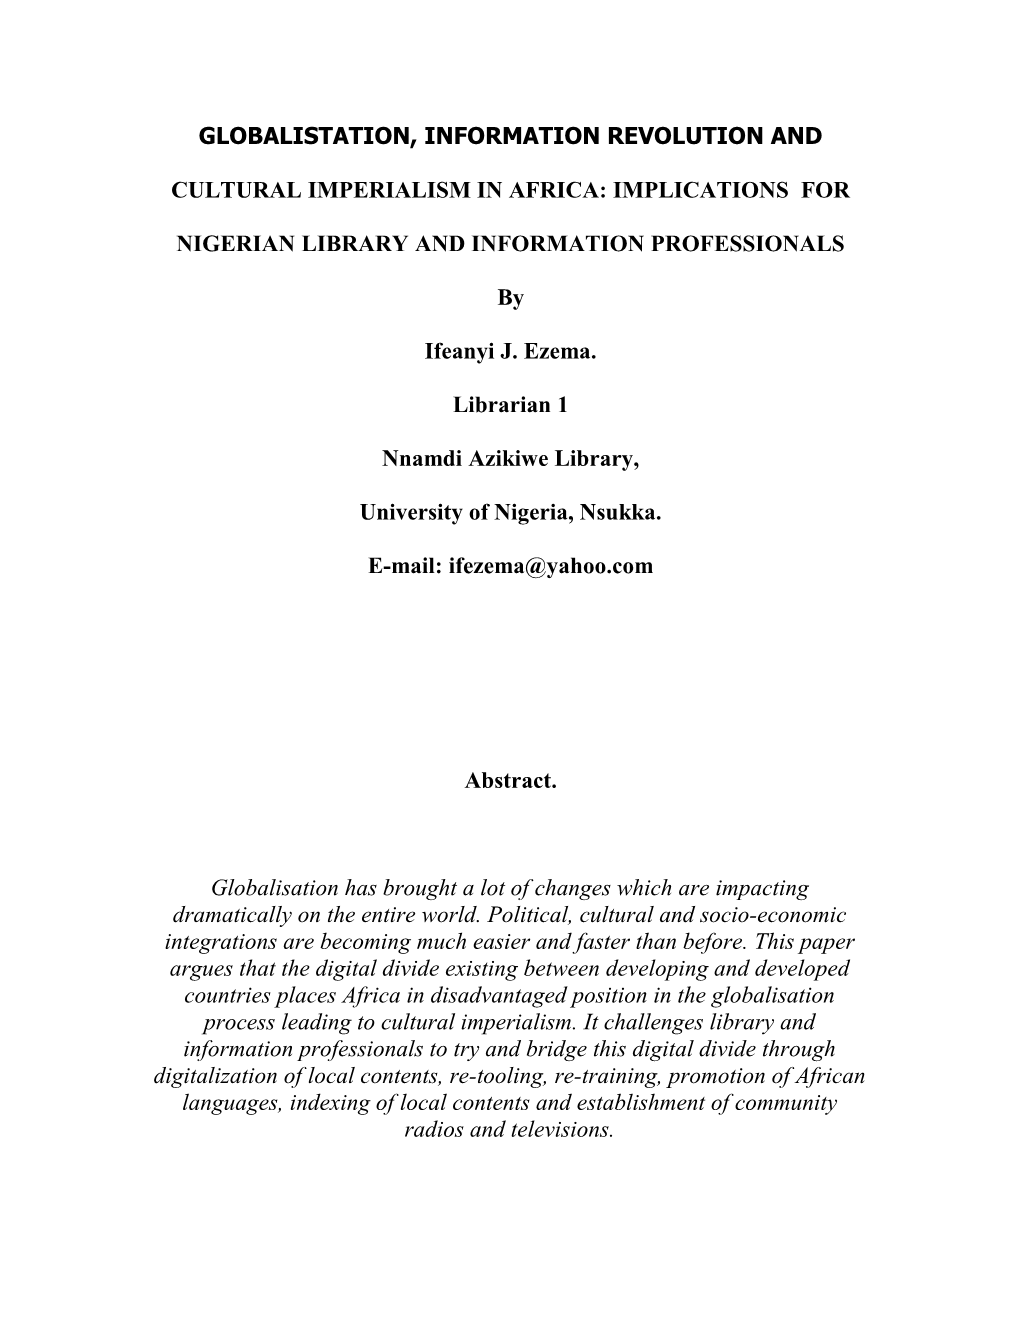 Globalistation, Information Revolution and Cultural Imperialism in Africa: Implications